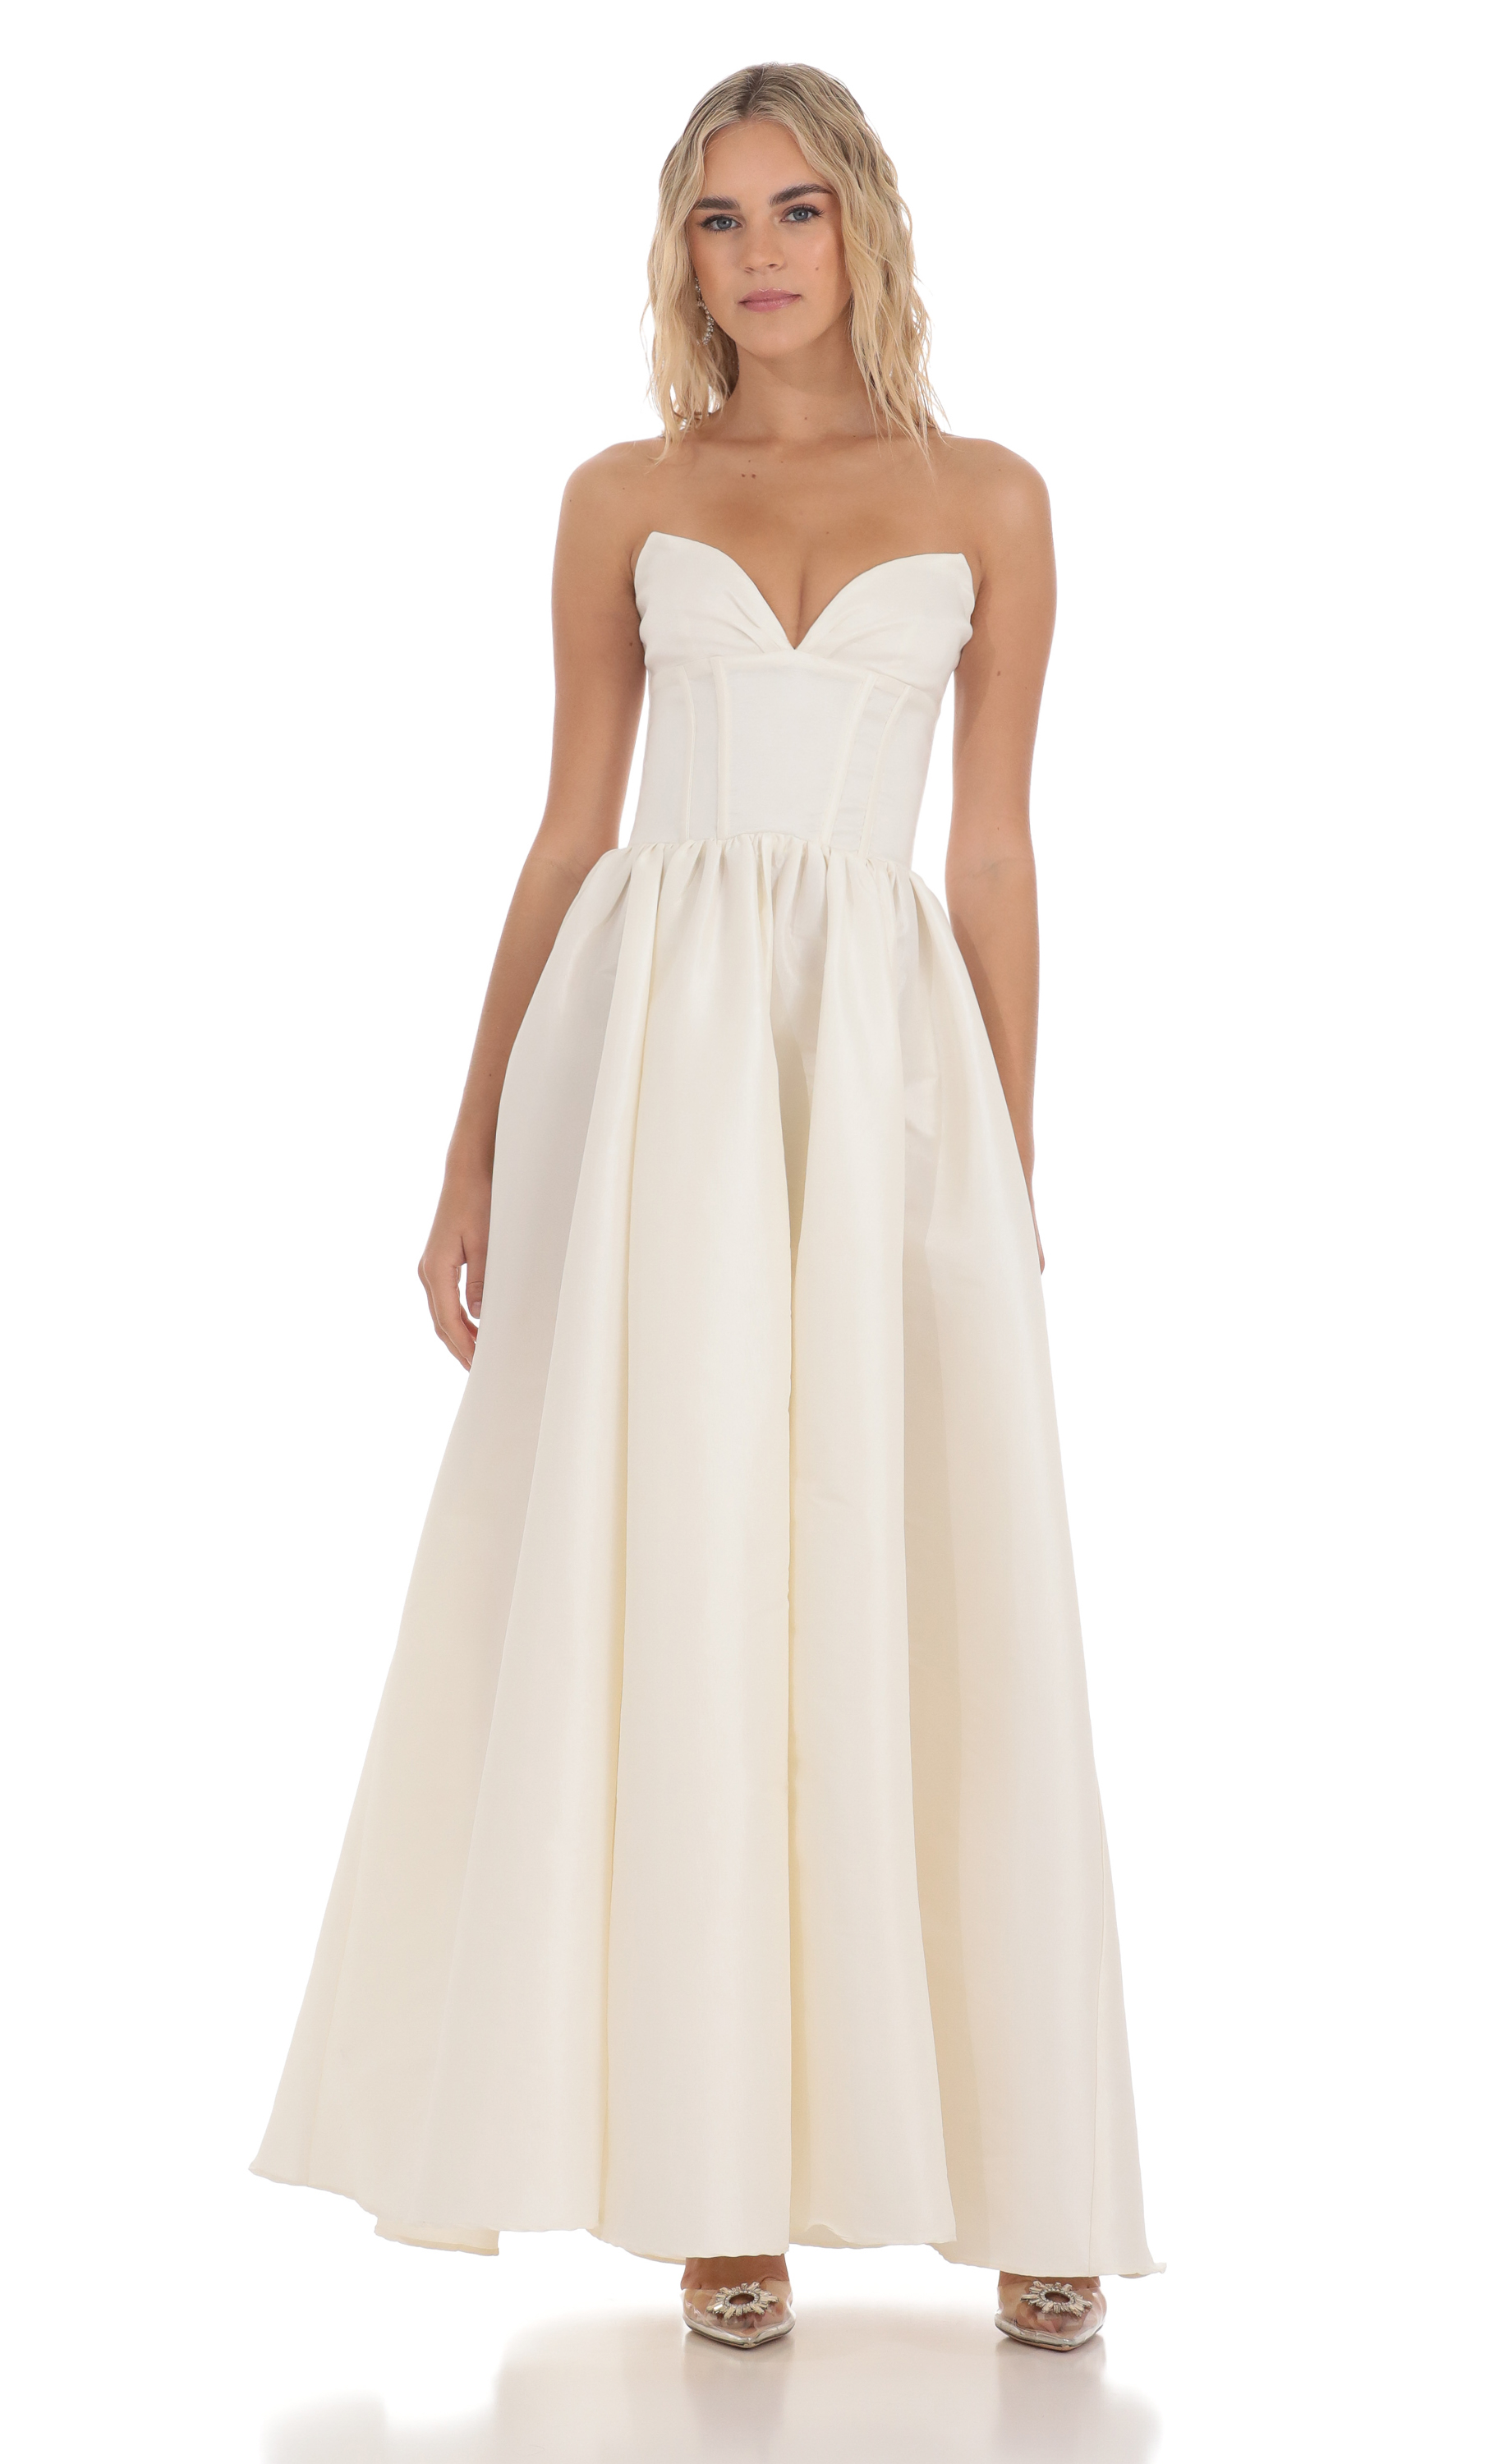 Corset Strapless Gown Dress in White